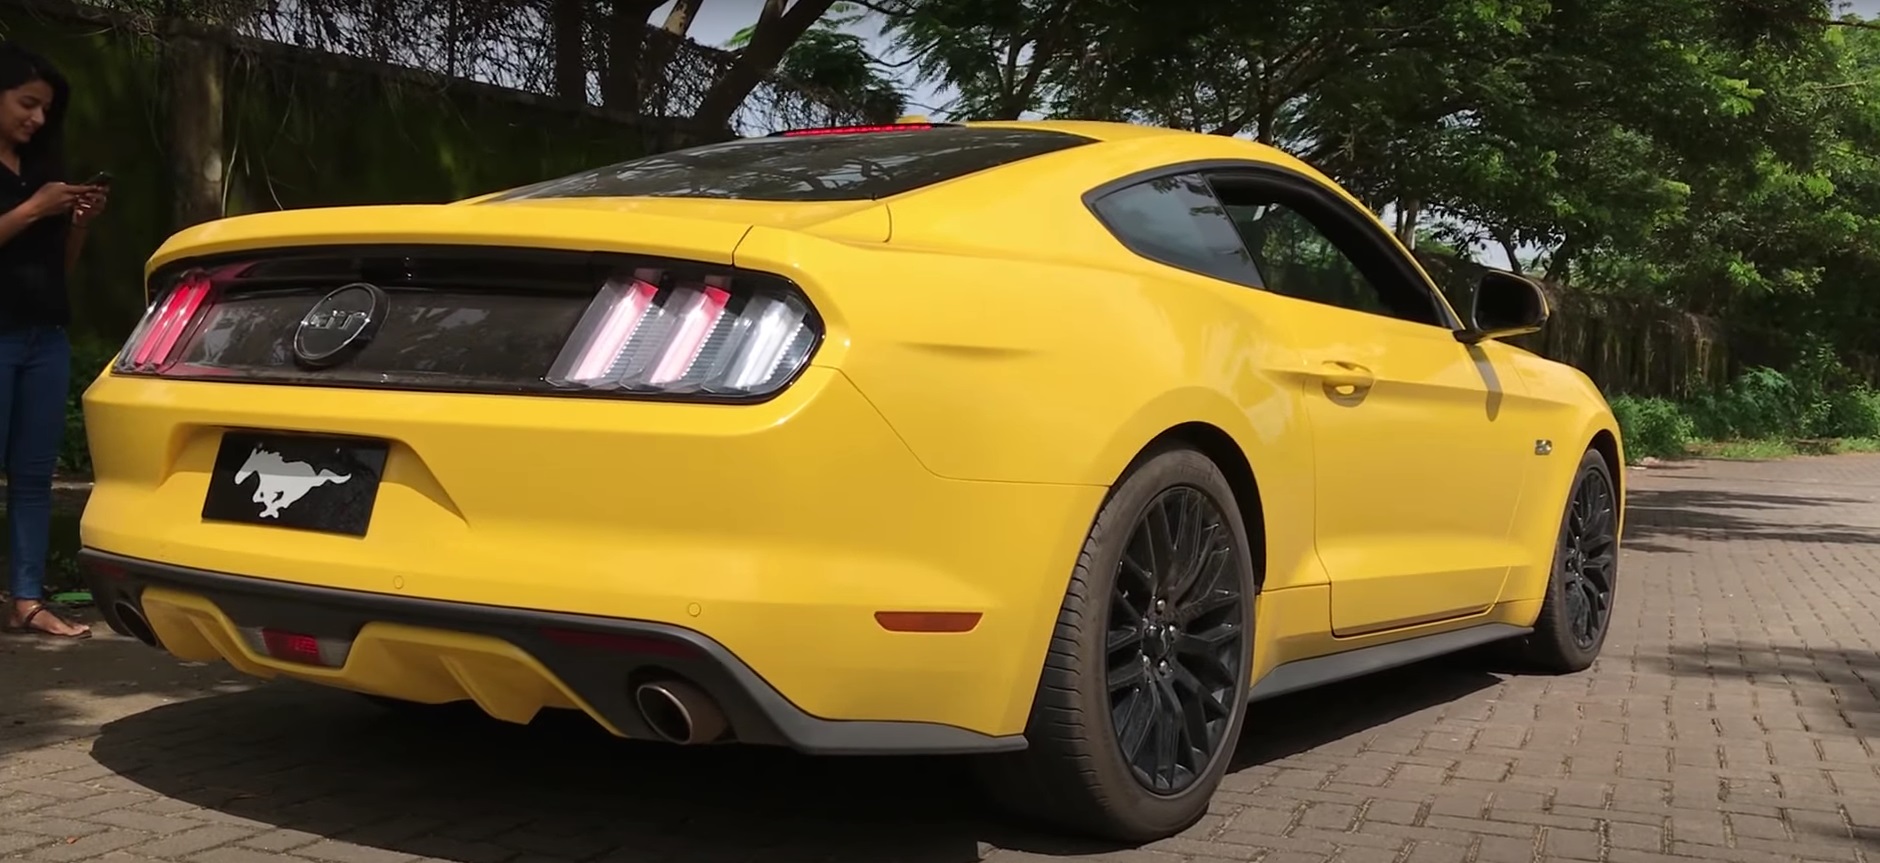 Video: 2017 Ford Mustang GT - Stock Exhaust Sounds + Modes